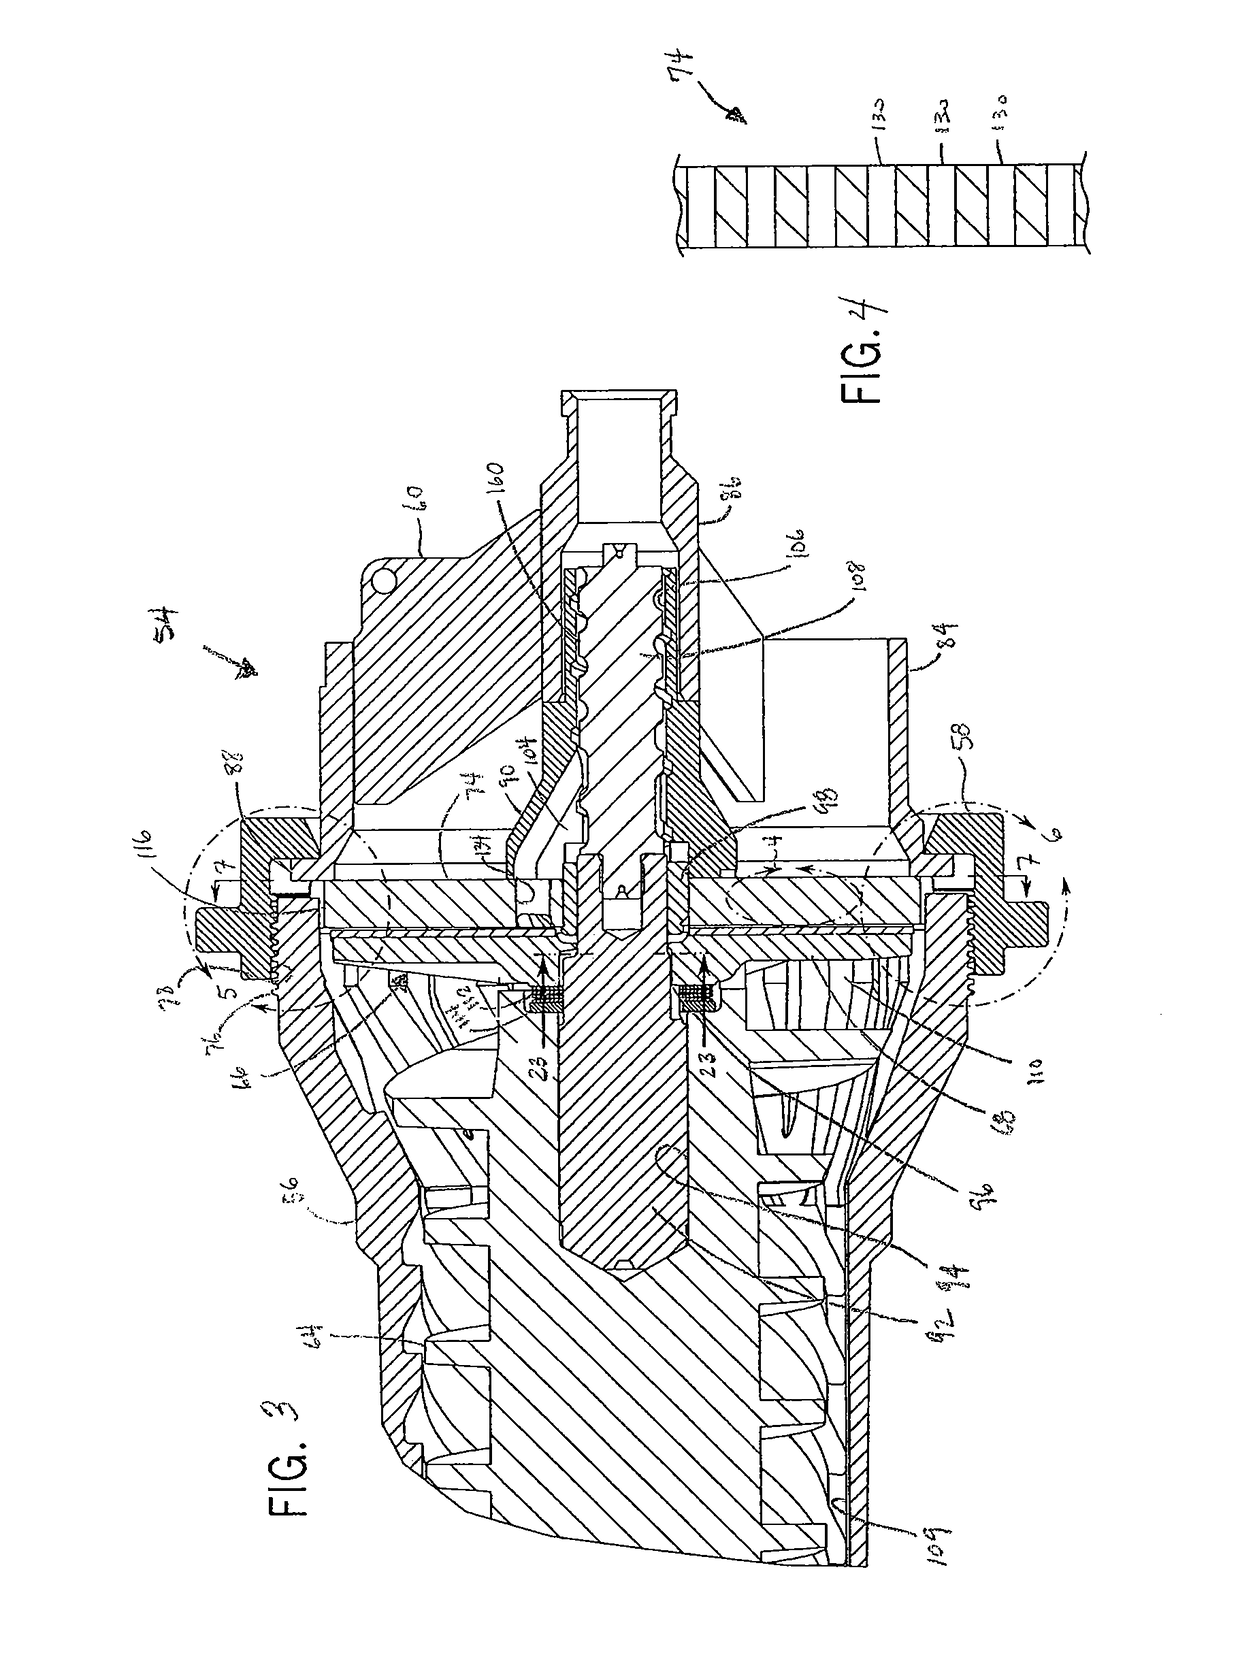 Self-correcting orifice plate installation for an orifice plate of a grinding machine